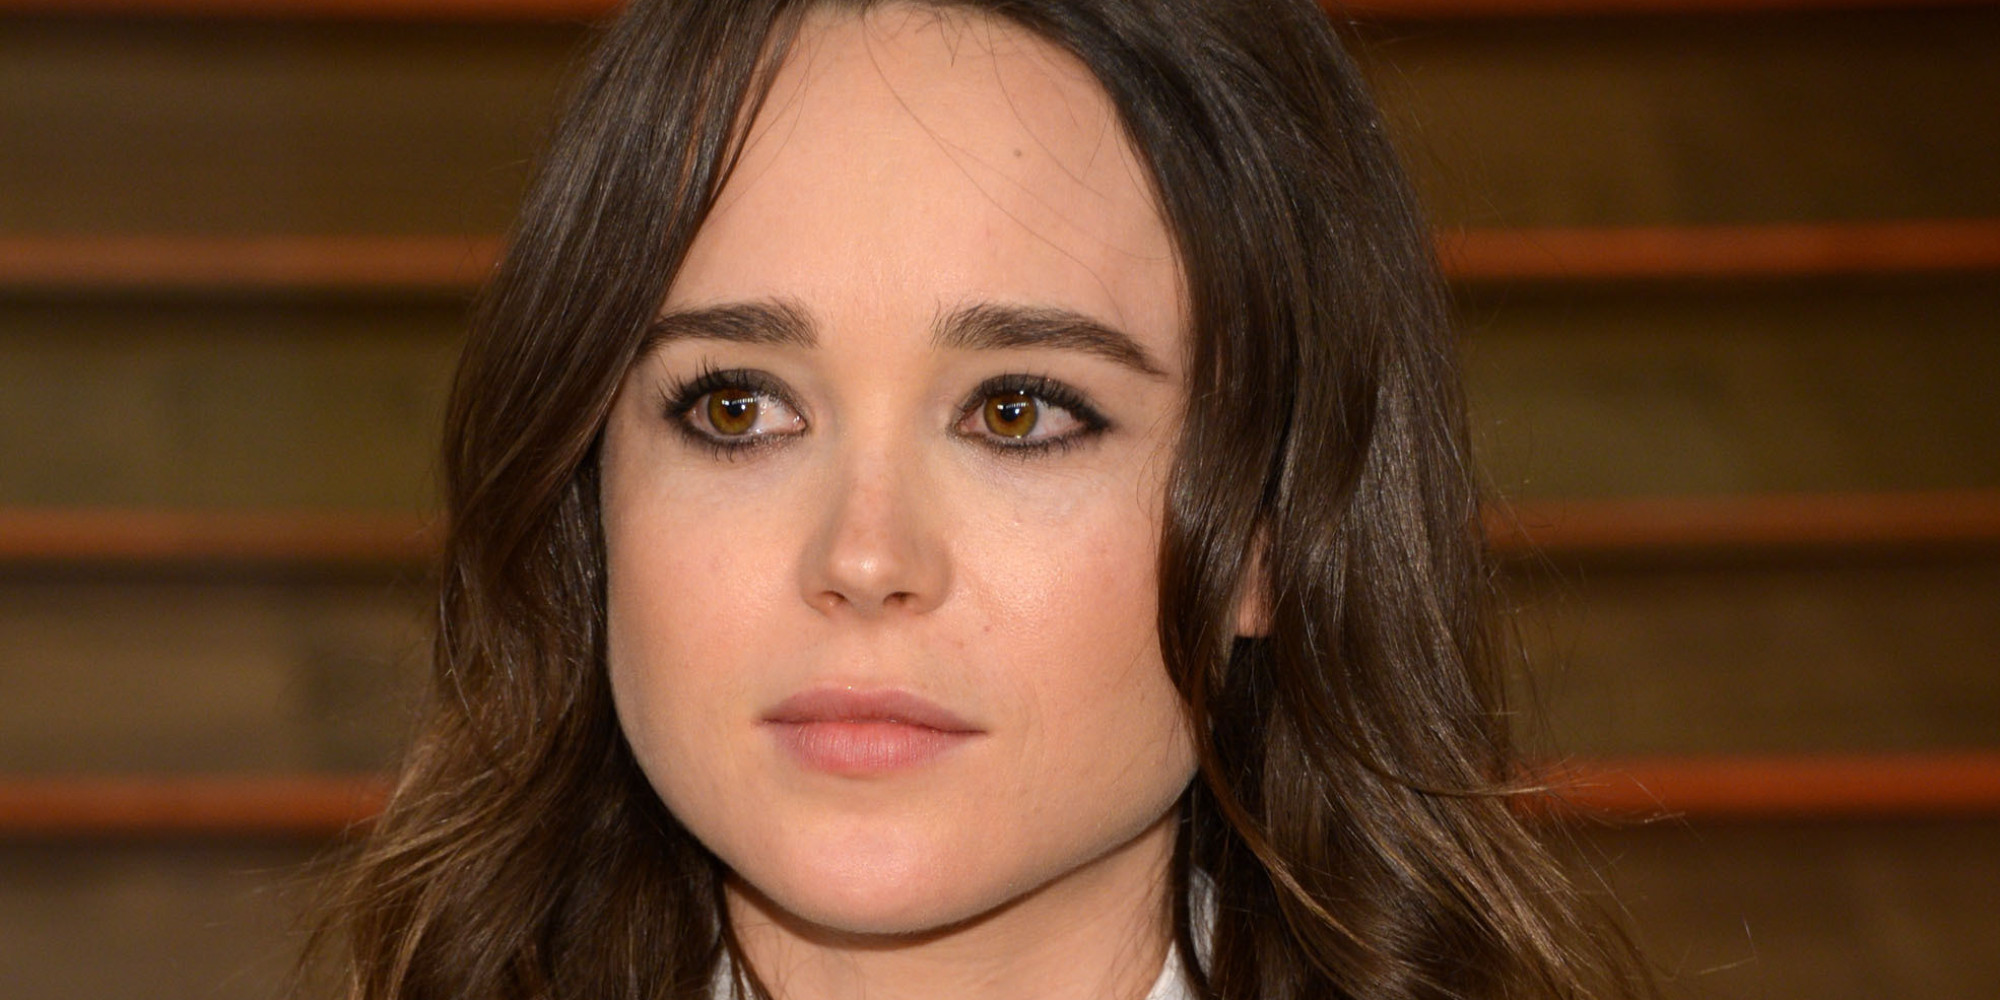 Ellen Page Joins Instagram, Talks About Coming Out | HuffPost